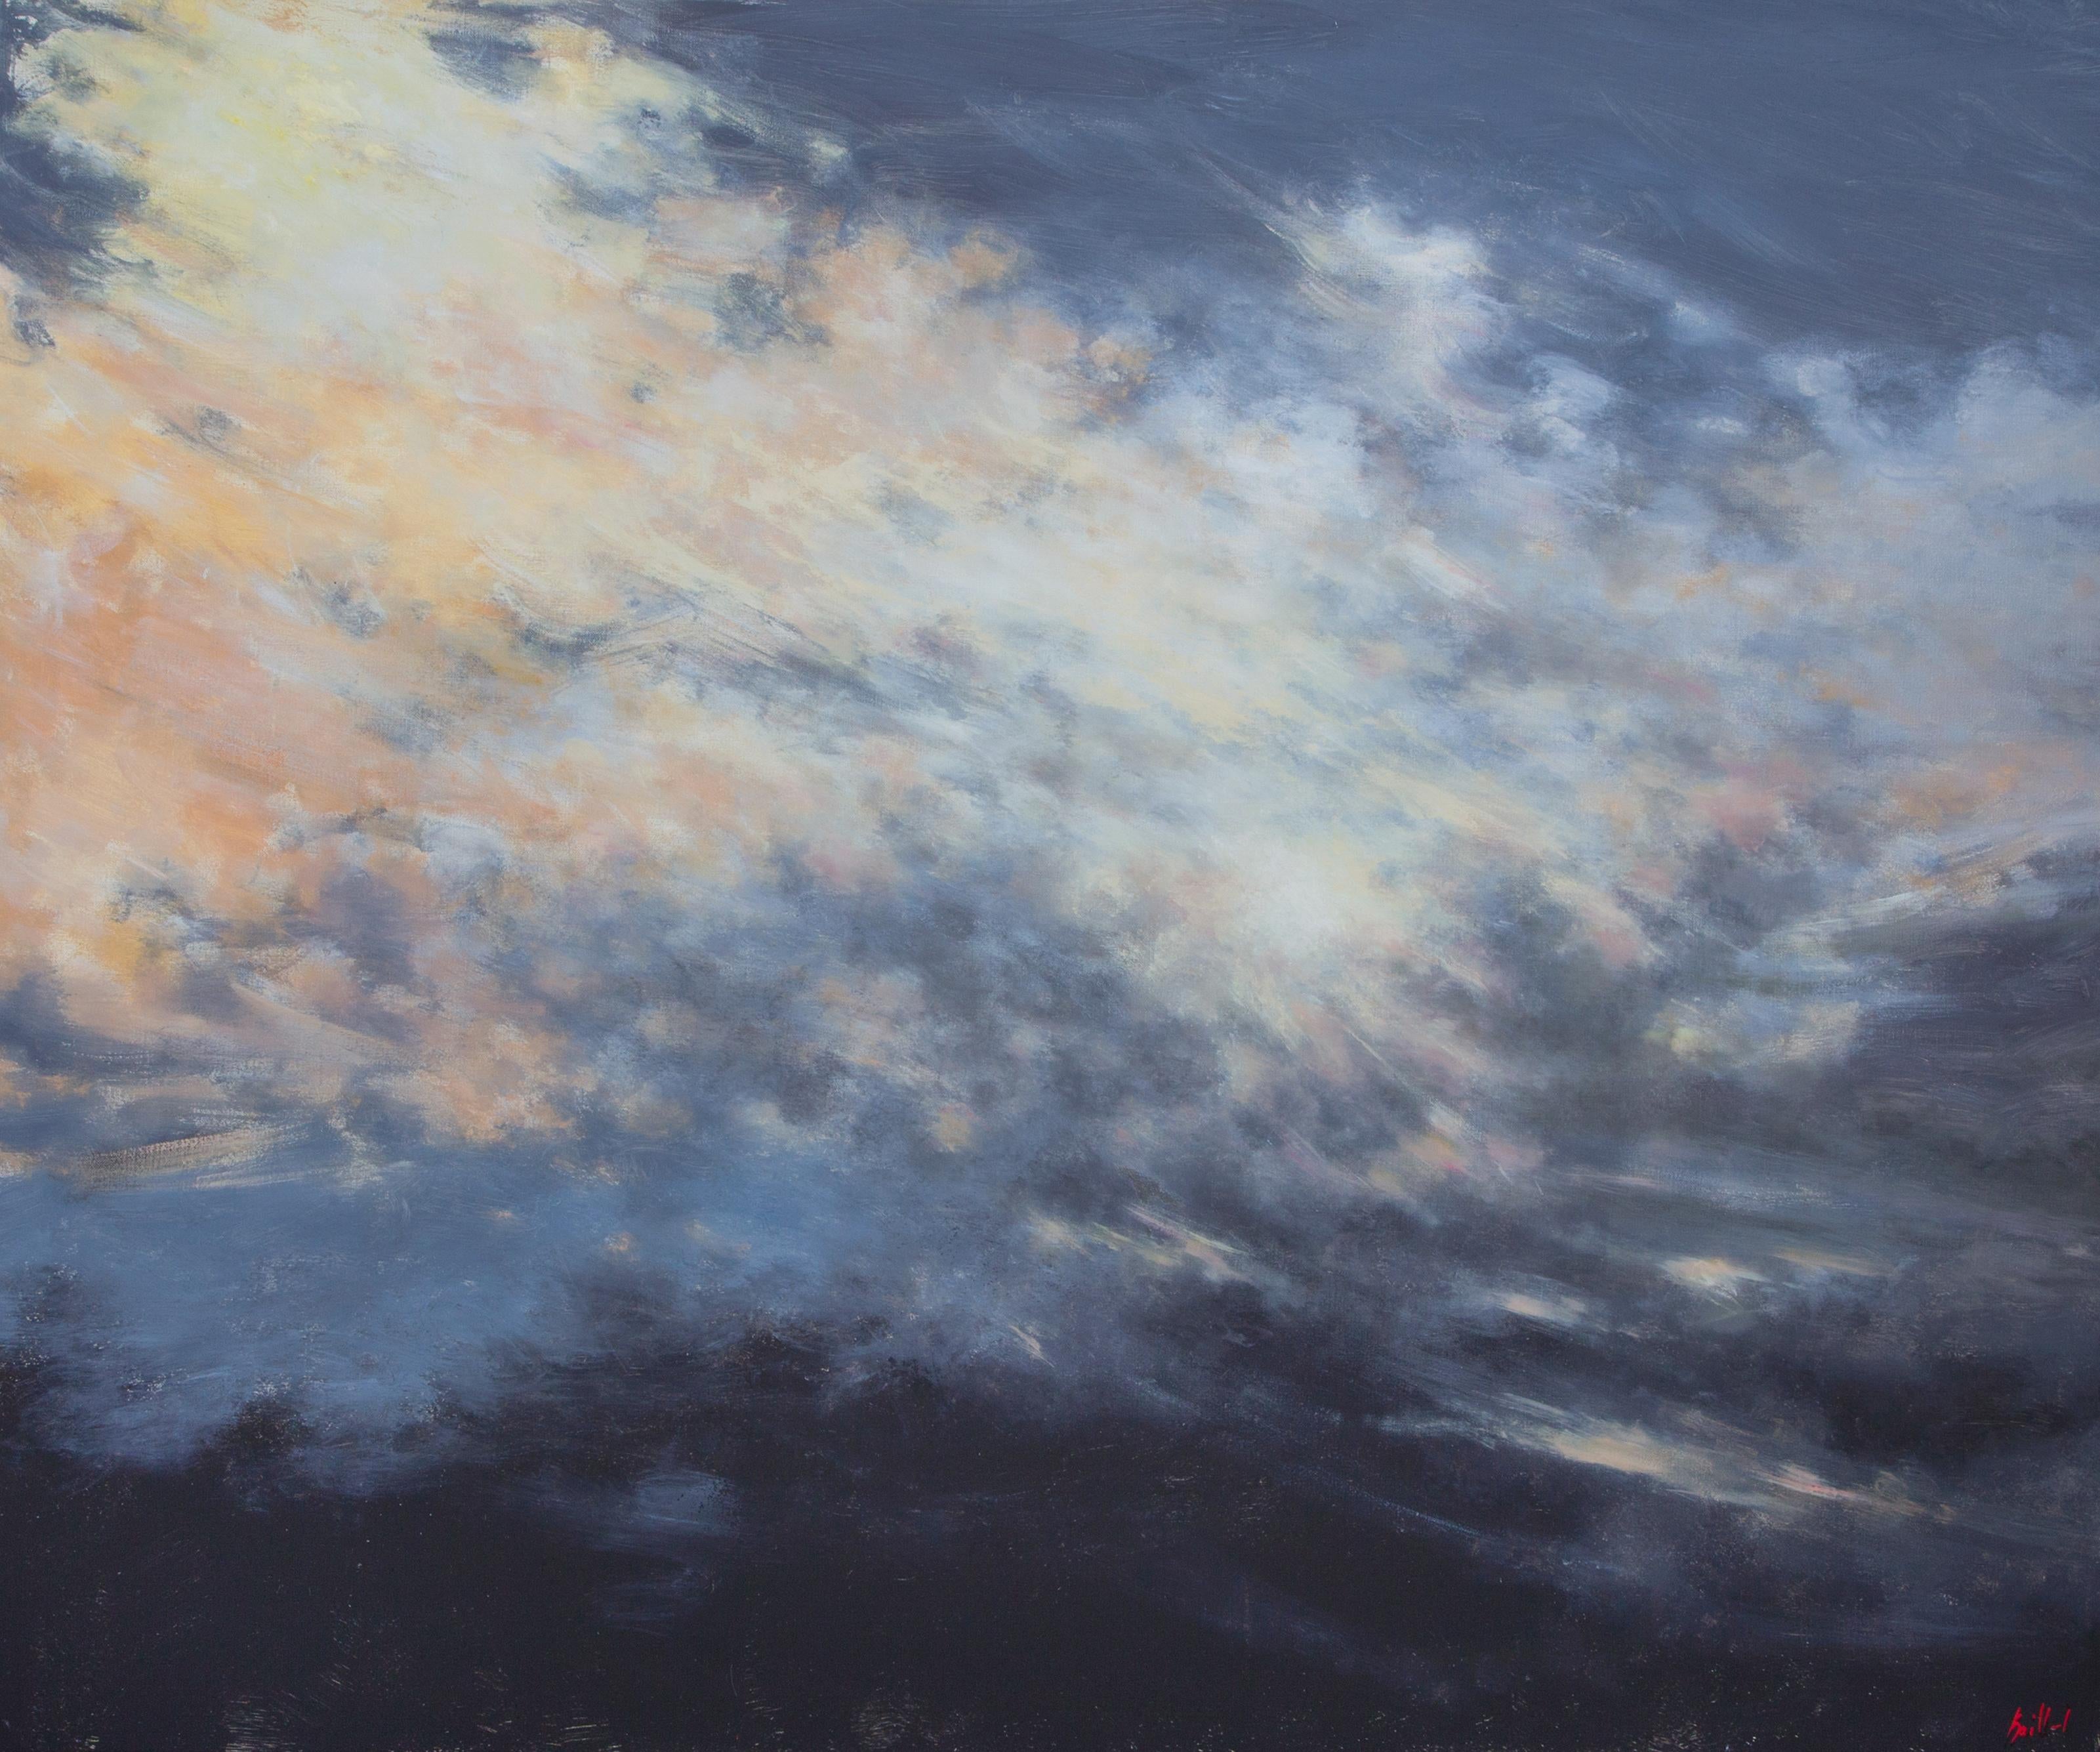 Artist statement:

The Generosity of Skies

I love the clouds… the clouds that pass by… out there… the wonderful clouds! 

For the artist Franck Bailleul, the sky is not static: ��“The perpetually moving skies (…) are incessantly altering their